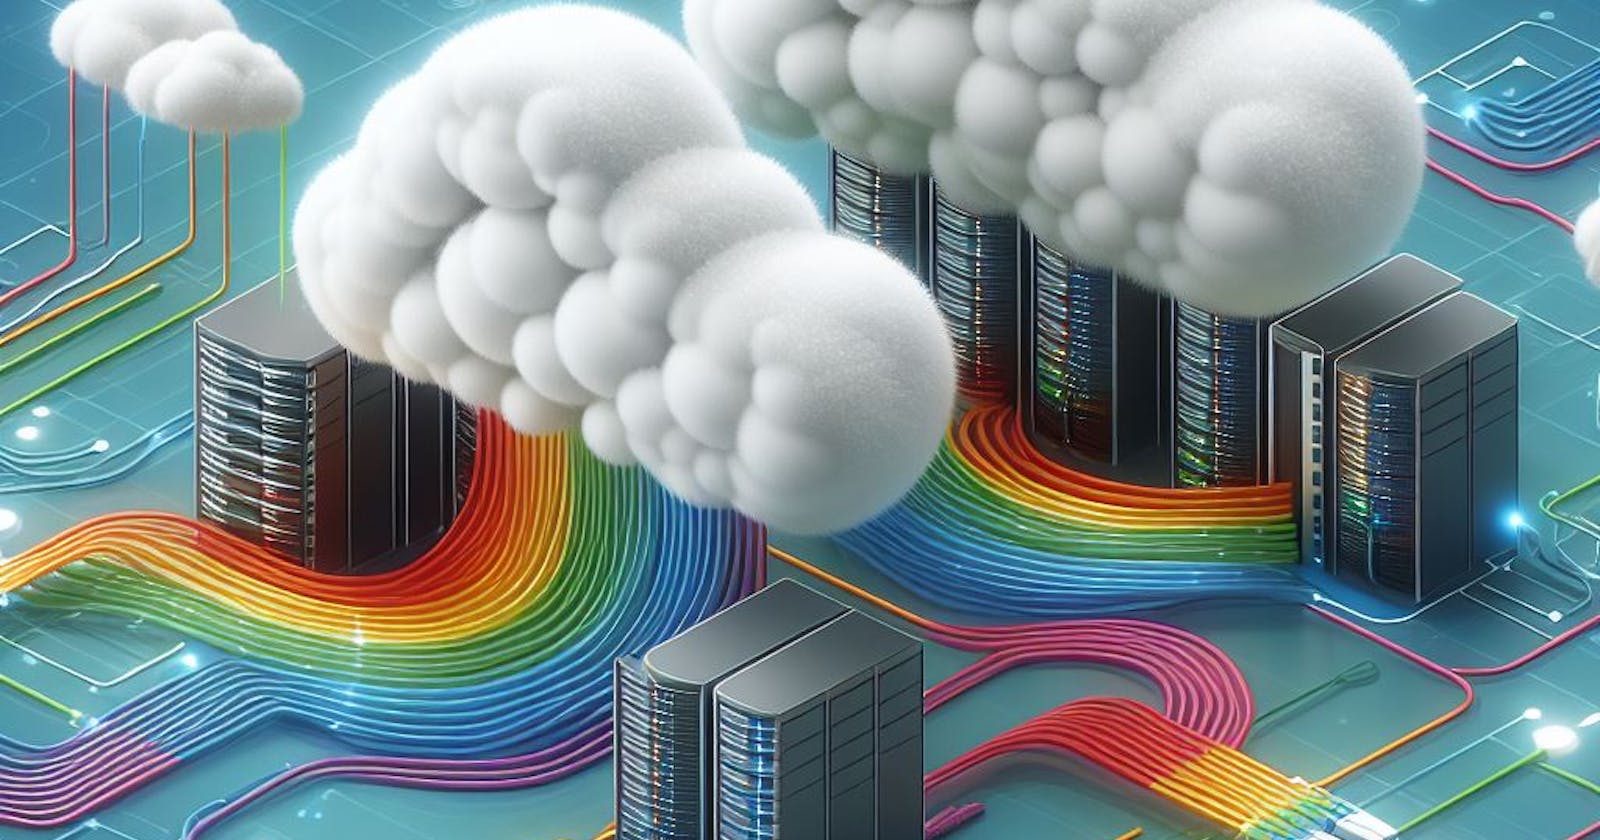 # Cloud Computing: A Simple Introduction